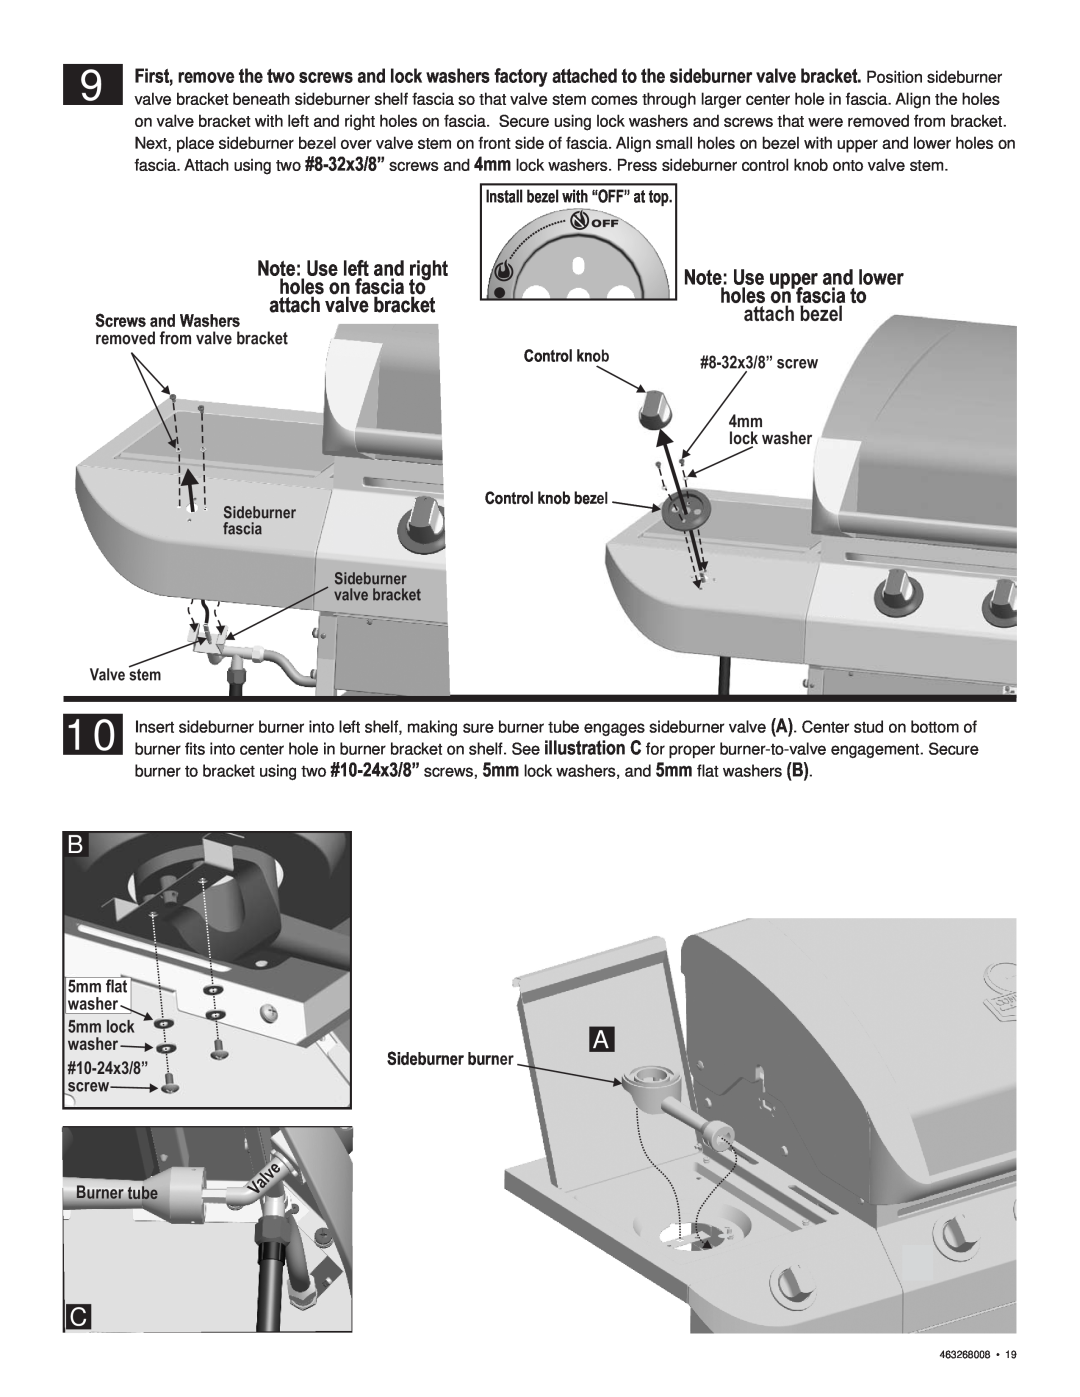 Char-Broil 463268008 manual holes on fascia to, Note Use upper and lower, attach valve bracket, attach bezel, Control knob 